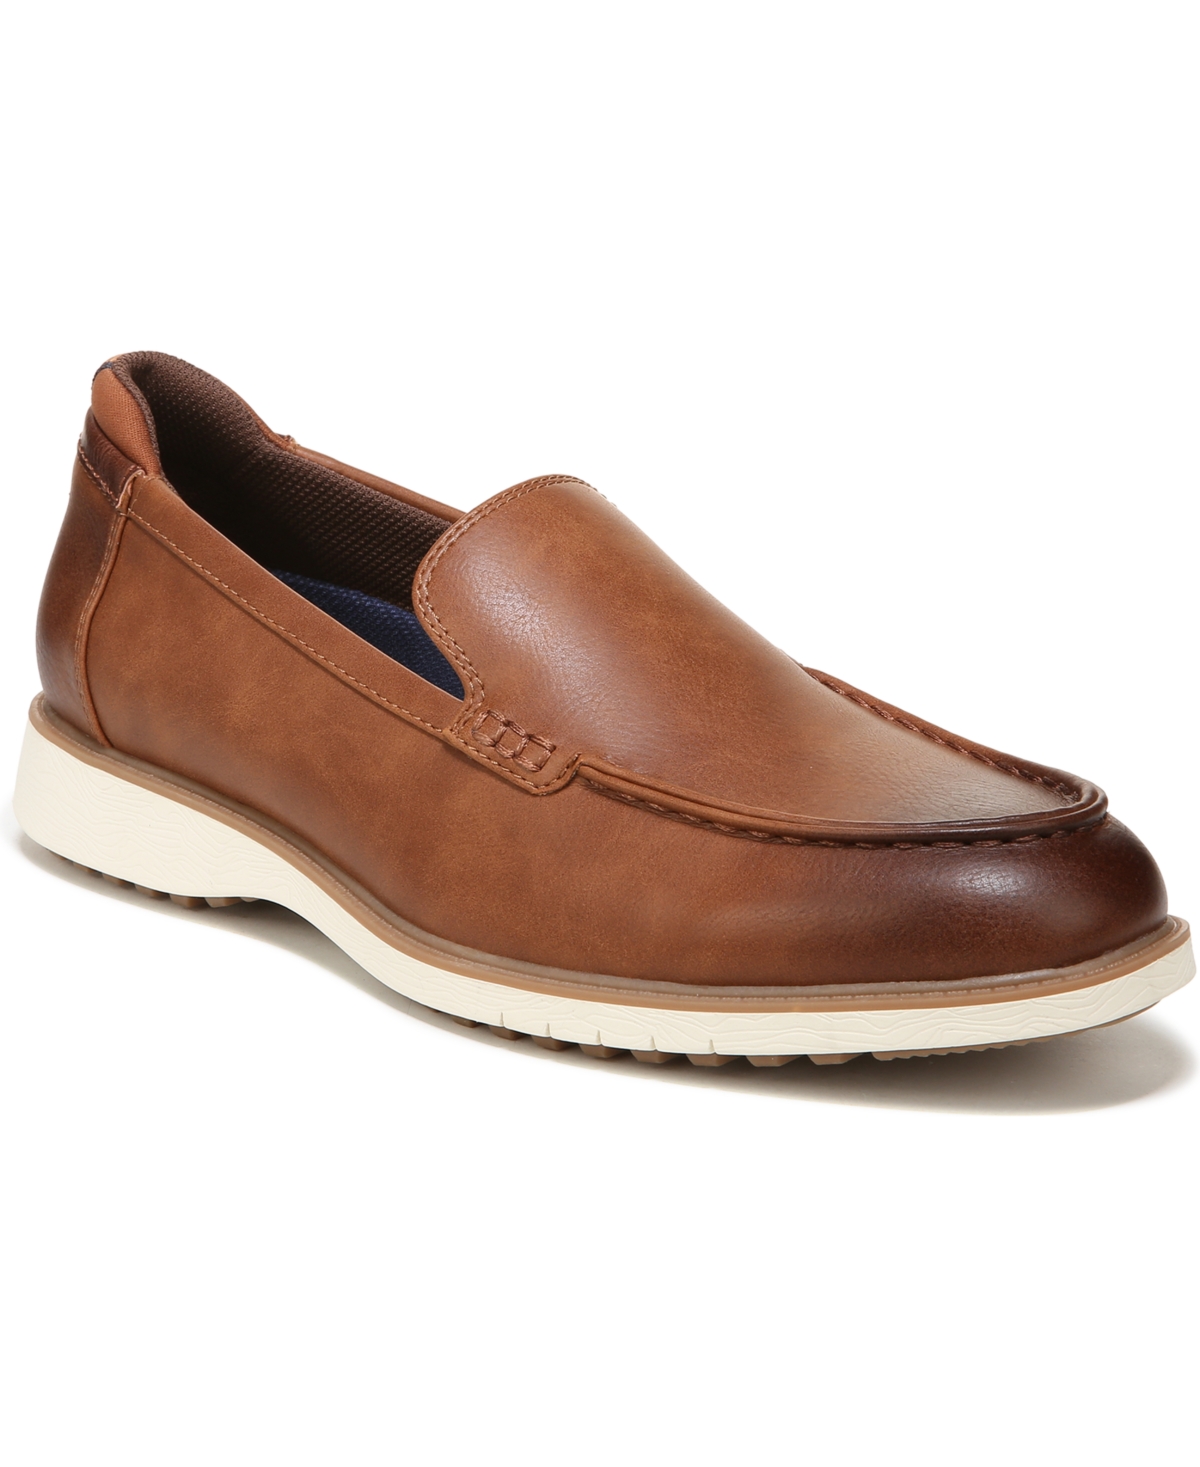 DR. SCHOLL'S MEN'S SYNC UP MOC SLIP-ONS LOAFERS SHOES